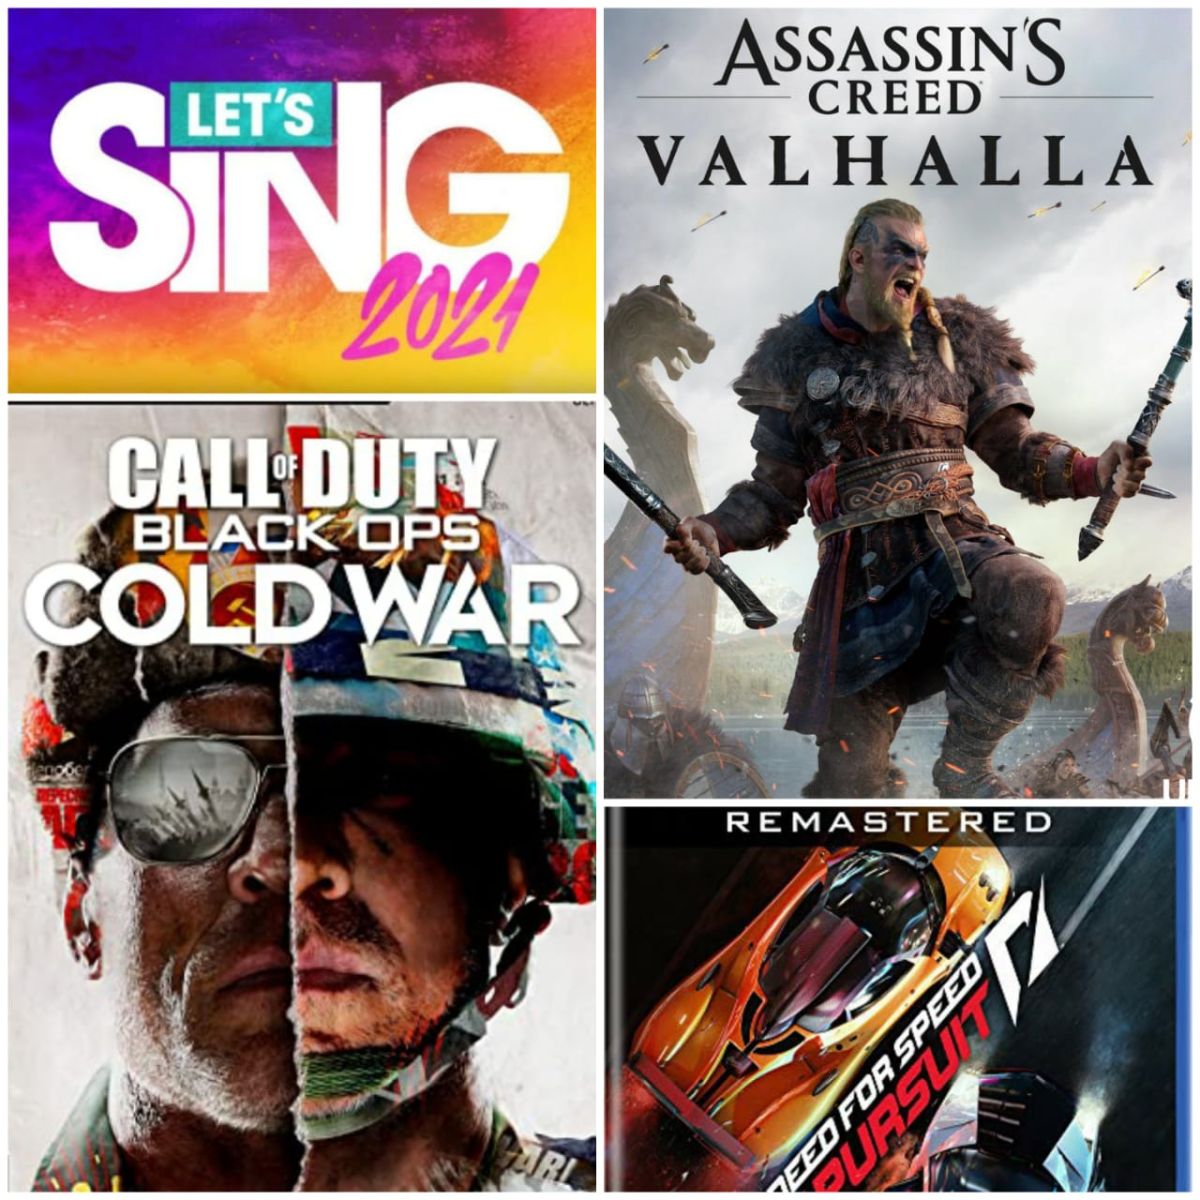 Reseña: Assassin’s Creed: Valhalla, Call of Duty: Black Ops Cold War, Let’s Sing 2021 y Need For Speed Hot Pursuit Remastered.